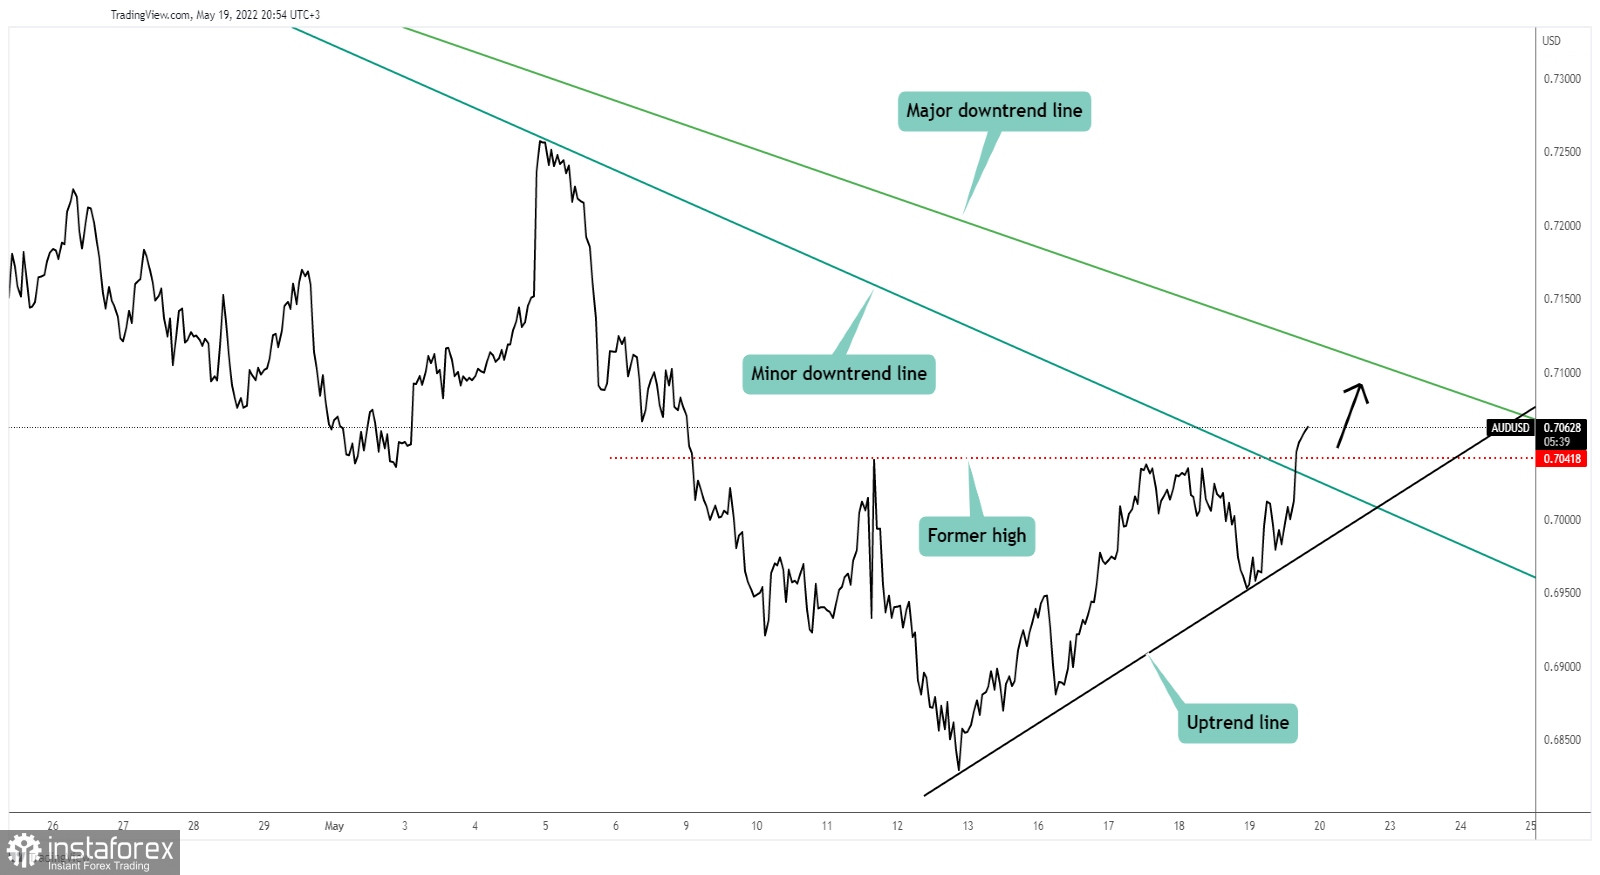 AUD/USD ignores strong upside obstacles